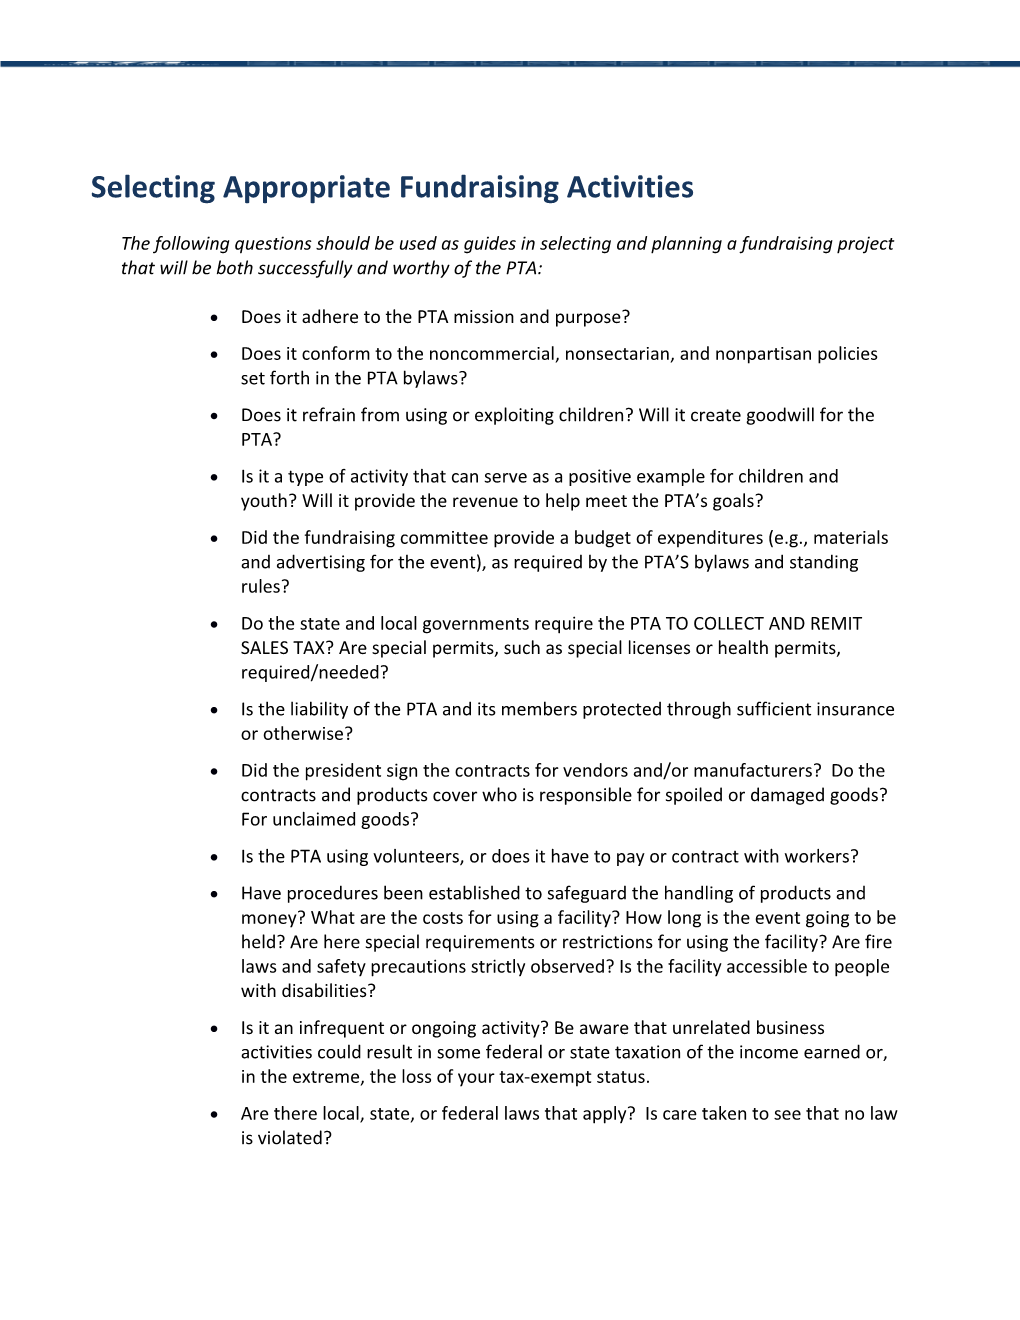 Selecting Appropriate Fundraising Activities